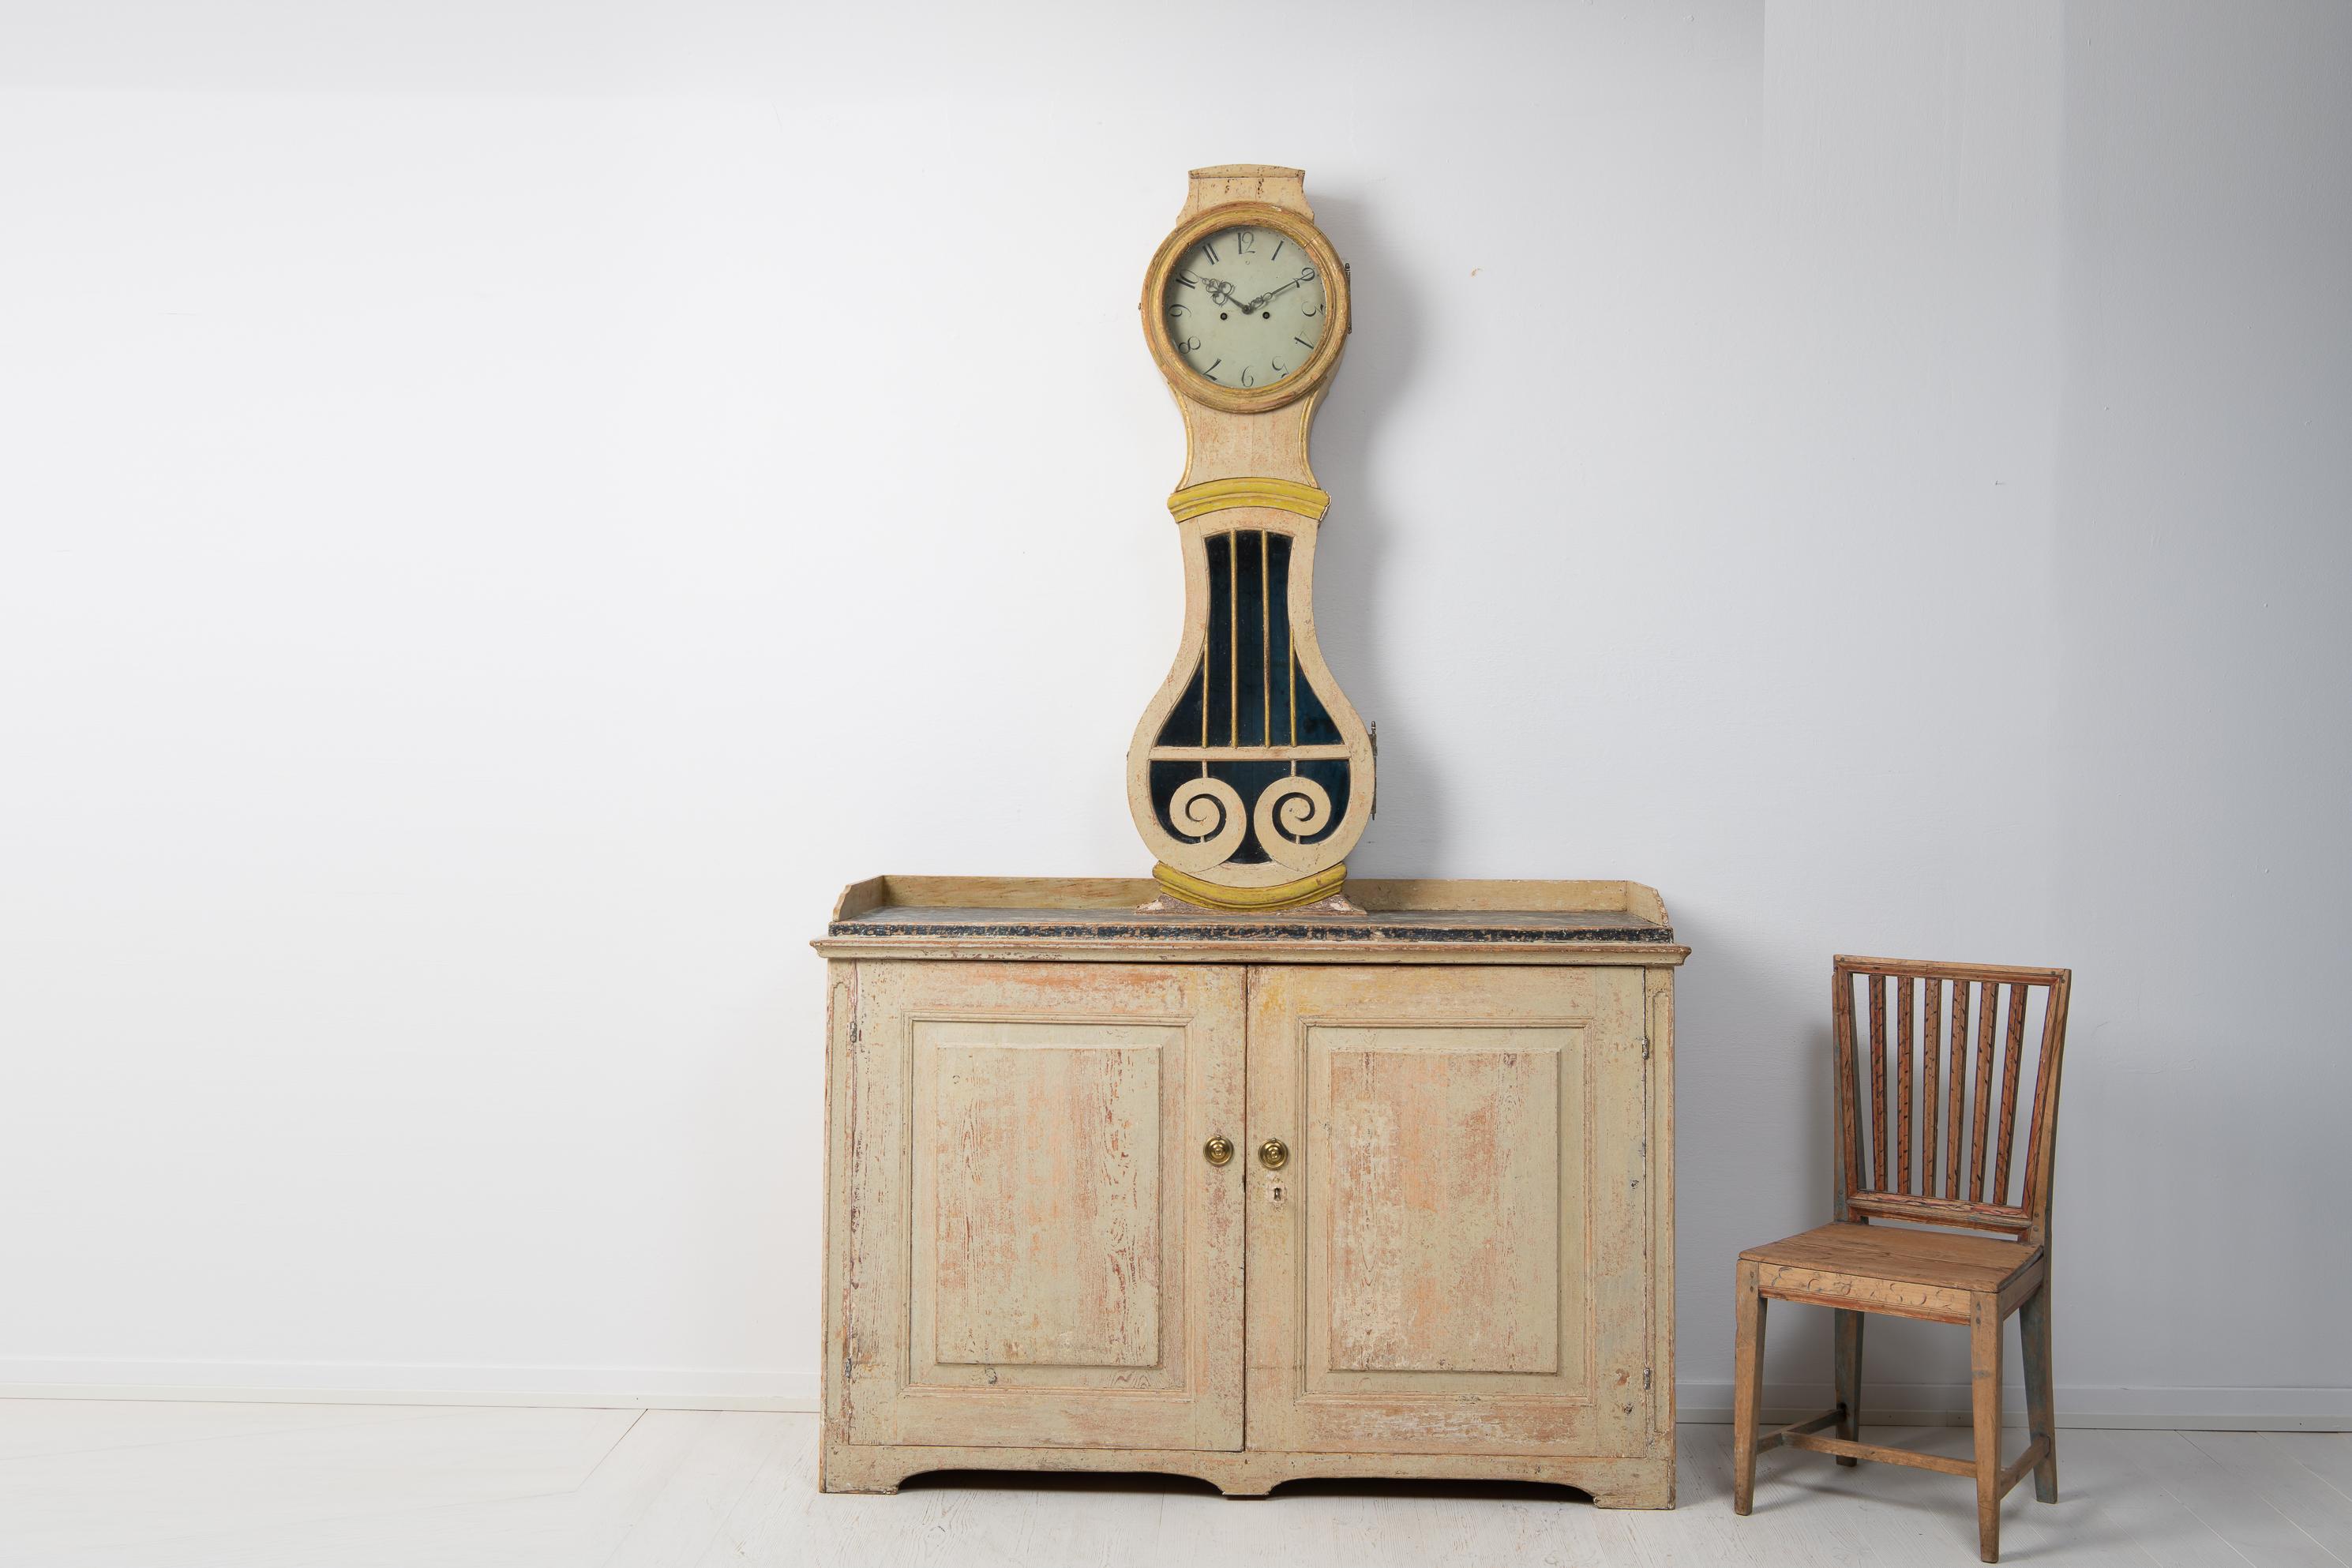 Rare antique clock cabinet from Sweden made during the transitional time between the gustavian and empire period. The cabinet is from Northern Sweden and is made around 1820 to 1840. The lower cabinet has two doors and behind them an interior with